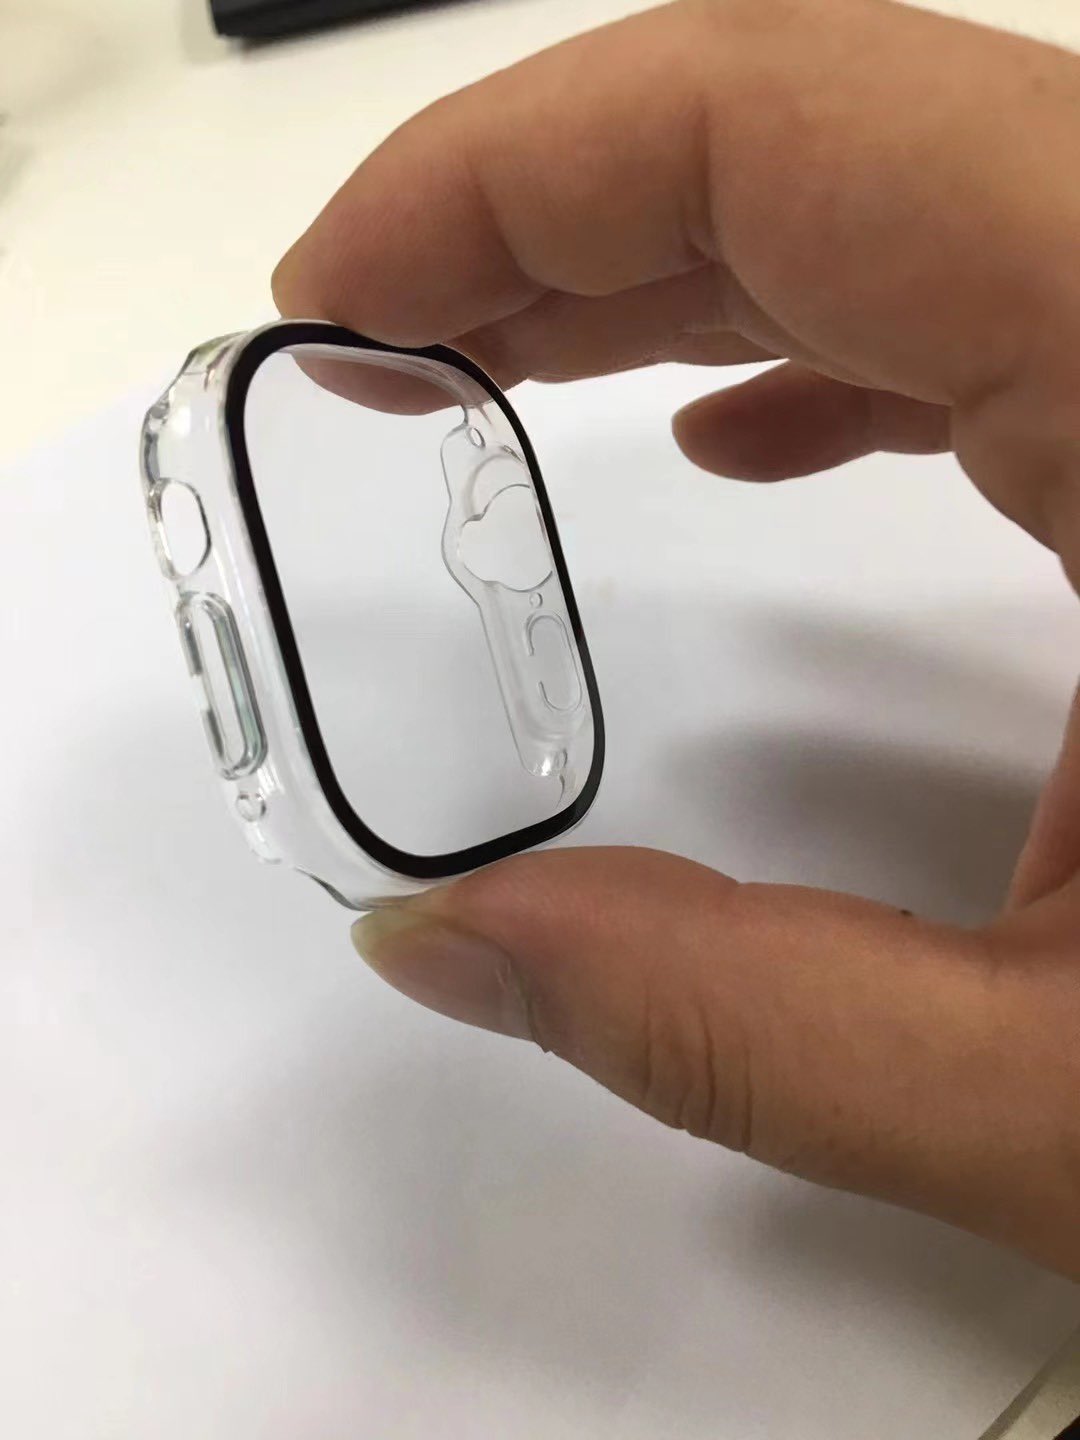 Apple Watch Pro Accessory Cases Allegedly Hint at Redesigned Chassis and Flatter Display